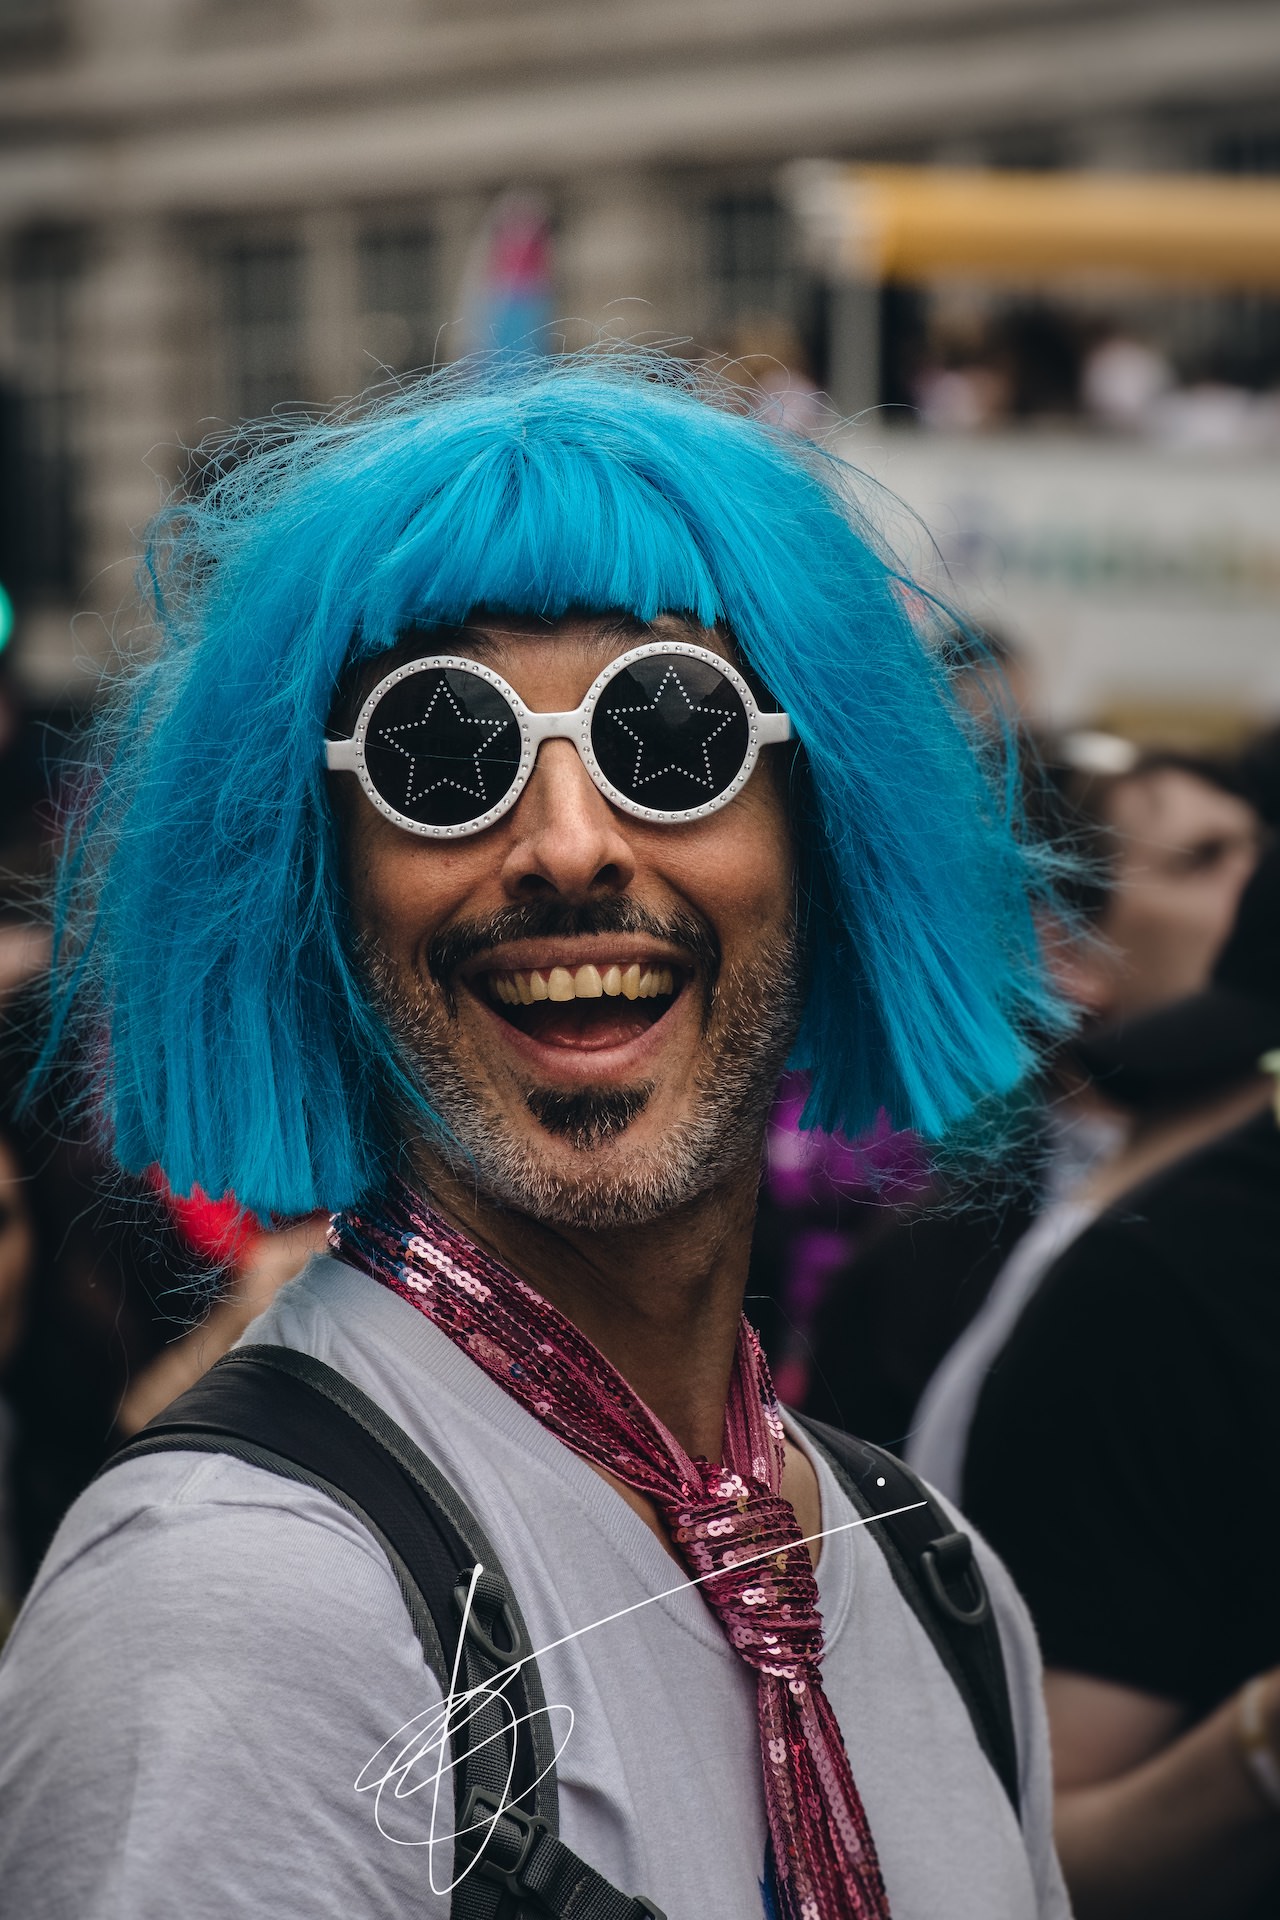 London Pride 2019 - man with blue wig and star glasses